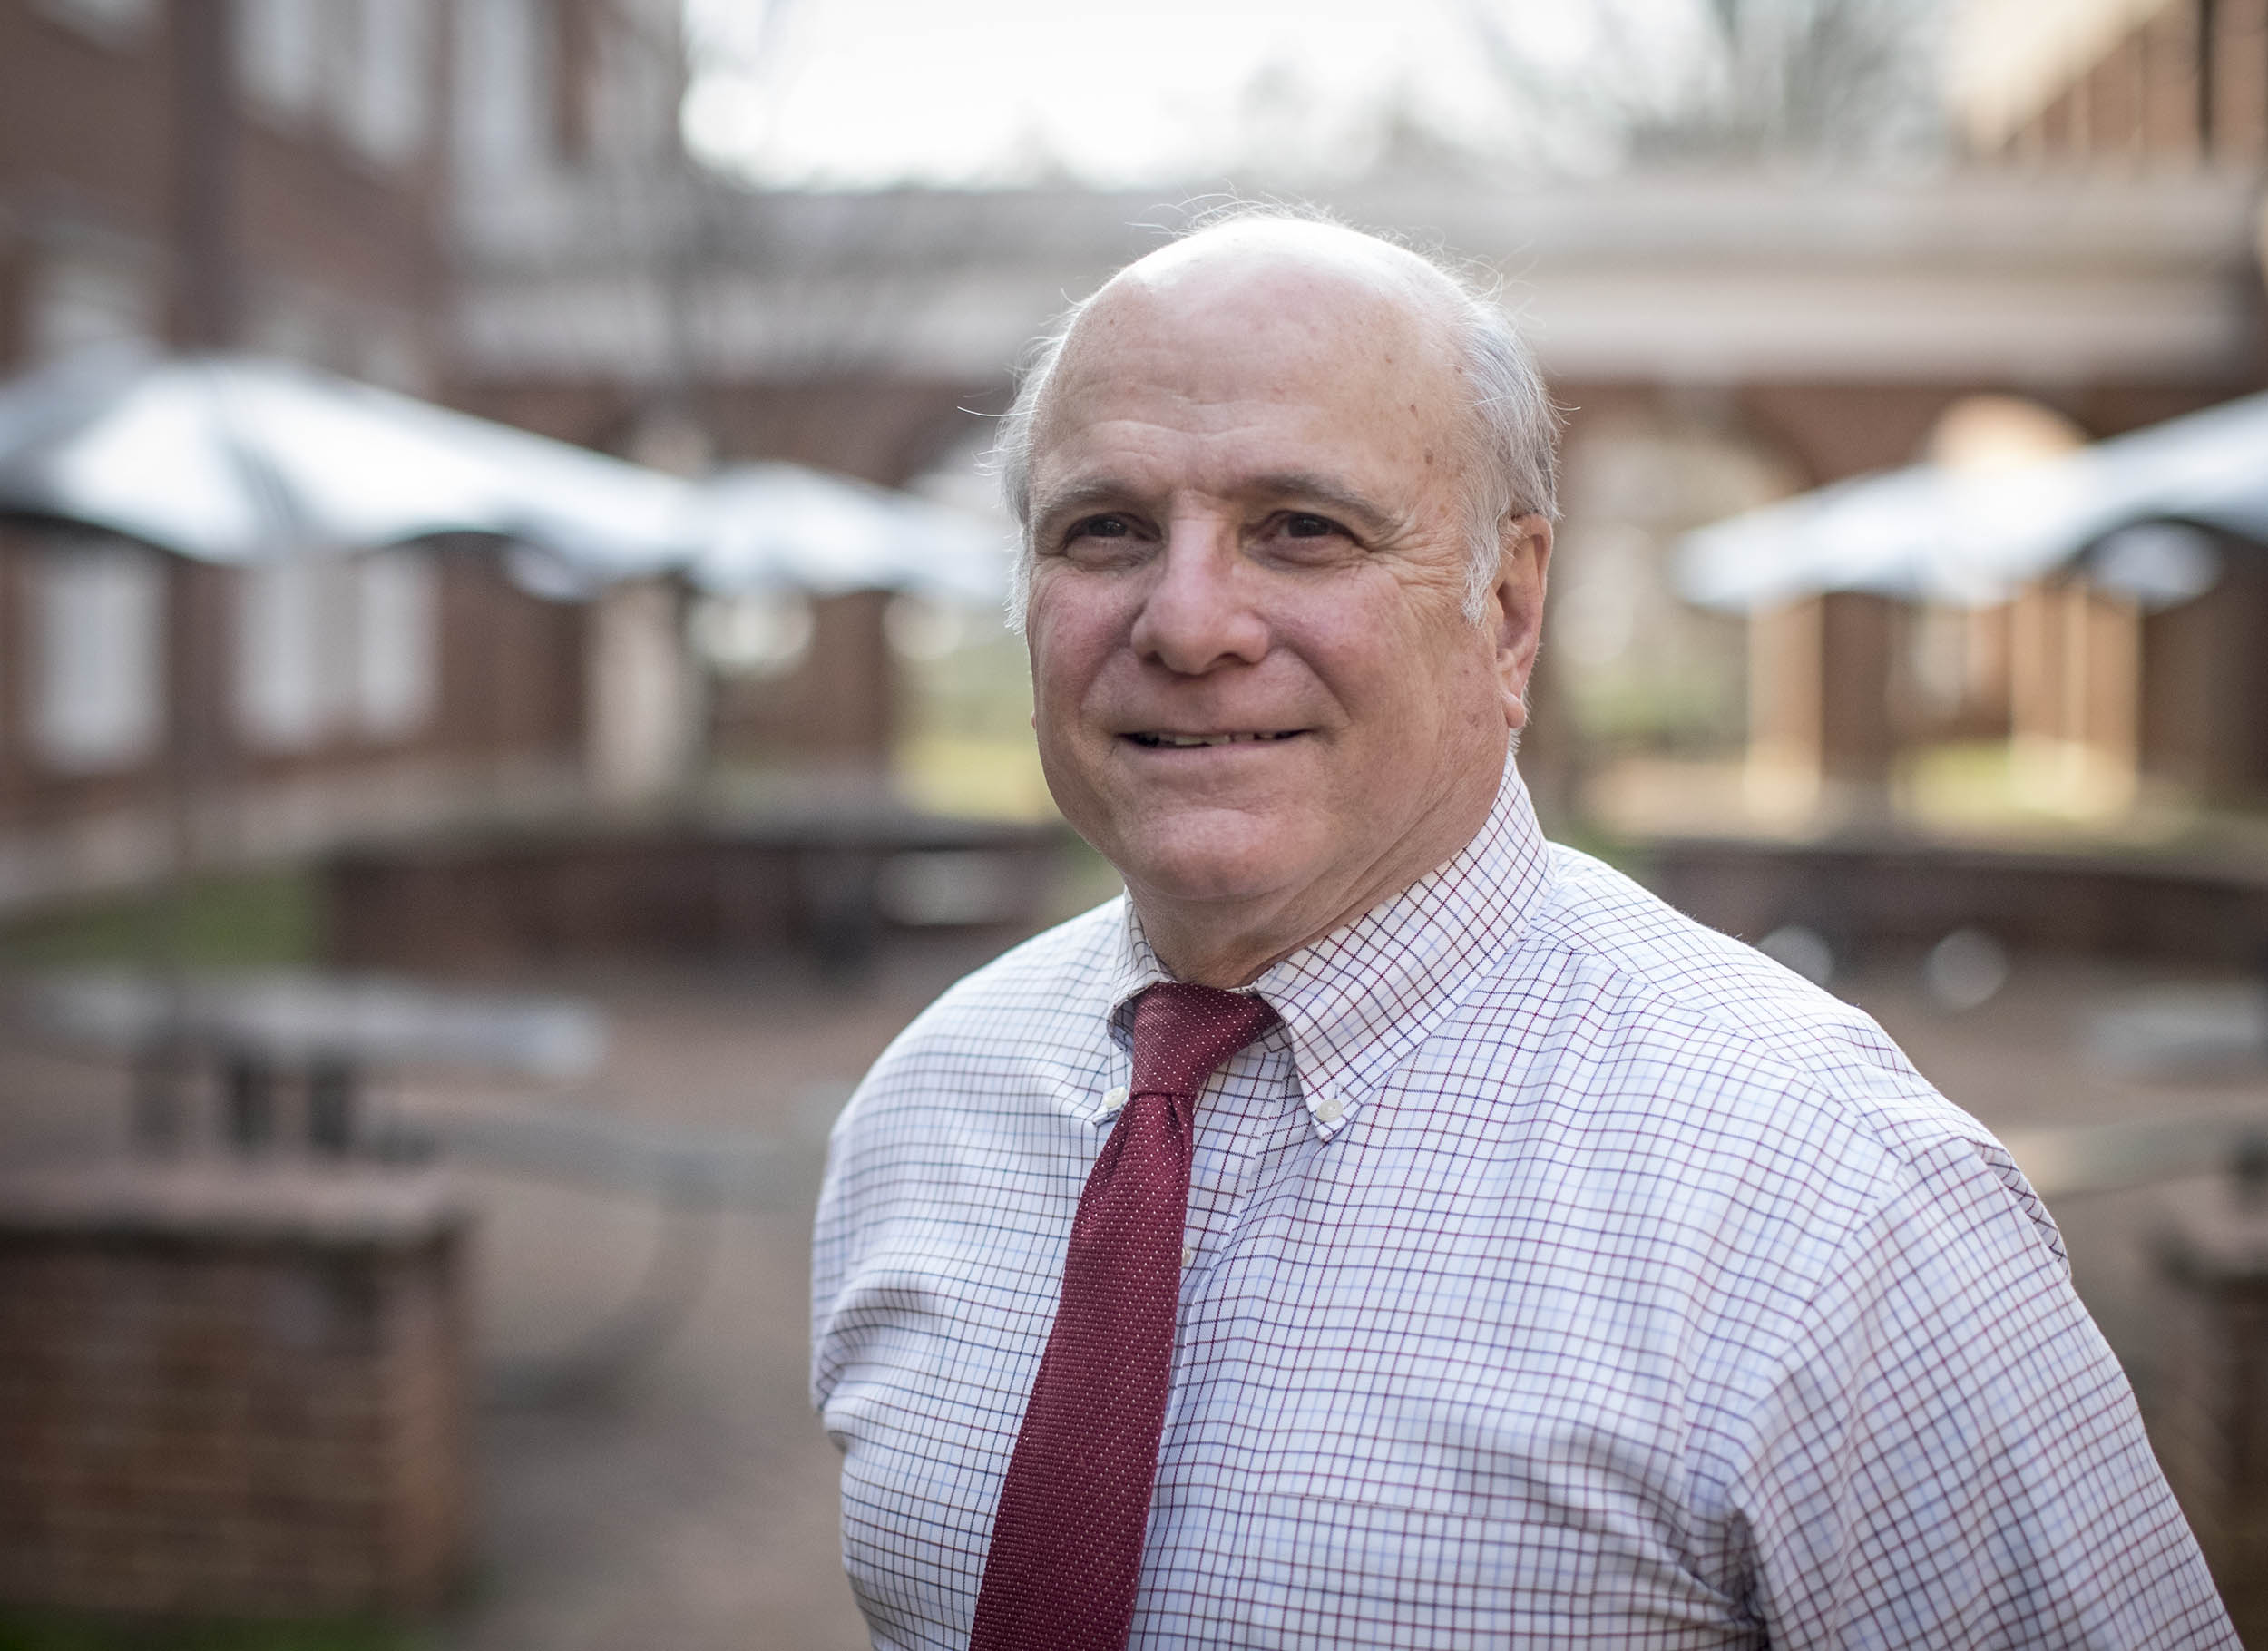 Clinical psychologist Peter Sheras serves on the board of the directors for the American Psychological Association and Virginia’s Board of Psychology.